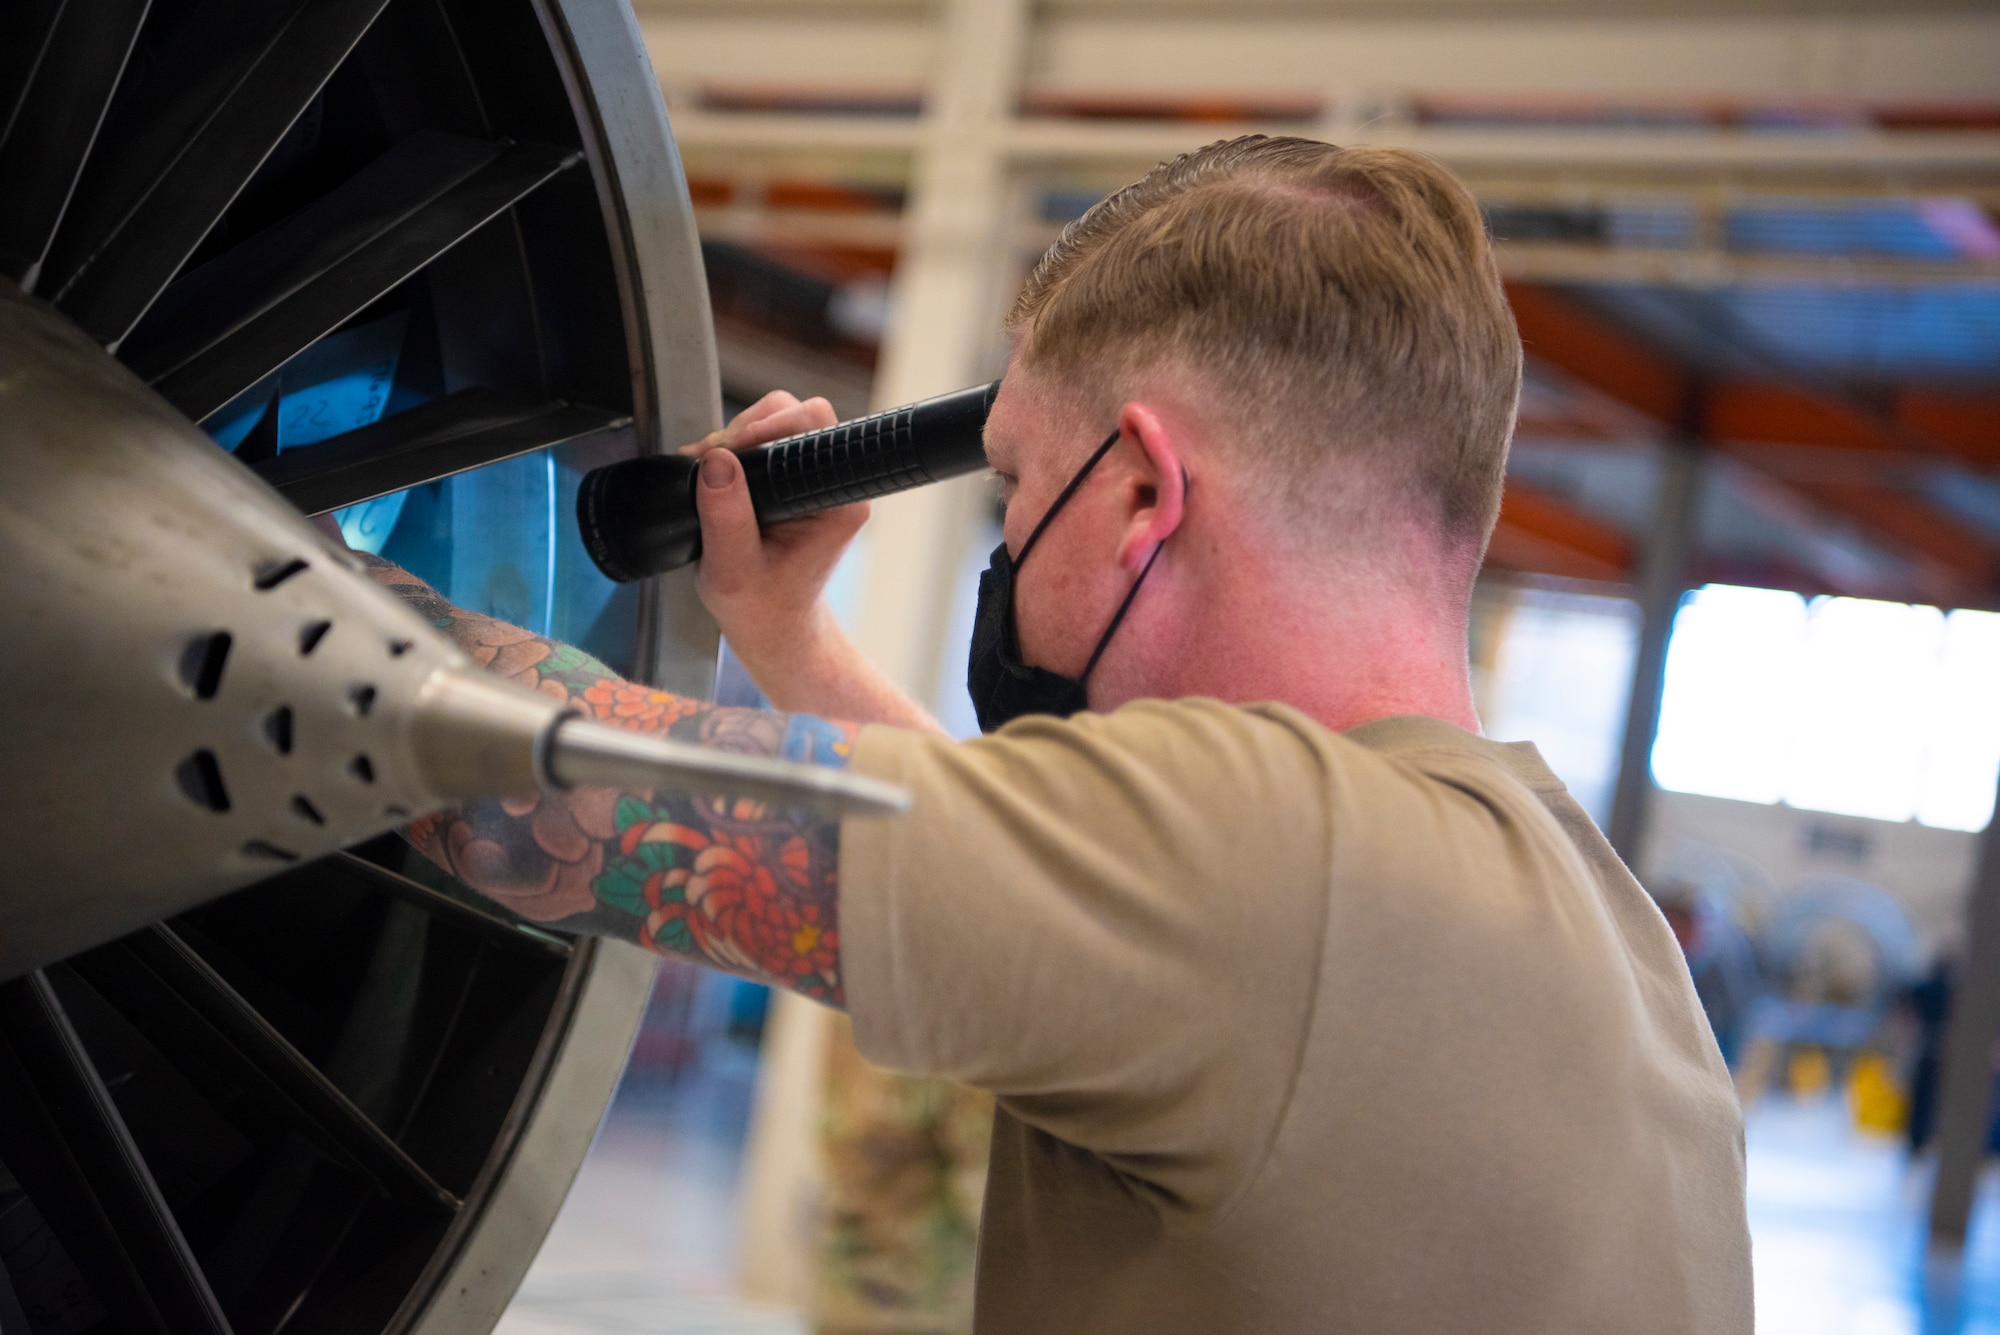 Staff Sgt. Dustin Bayer, 49th Component Maintenance Squadron dock chief, inspects the inside of a F-16 Viper engine fan for foreign object debris, May 13, 2021, on Holloman Air Force Base, New Mexico. Internal FOD is any article or substance not from the aircraft or system, which could potentially cause damage. (U.S. Air Force photo by Airman 1st Class Jessica Sanchez)